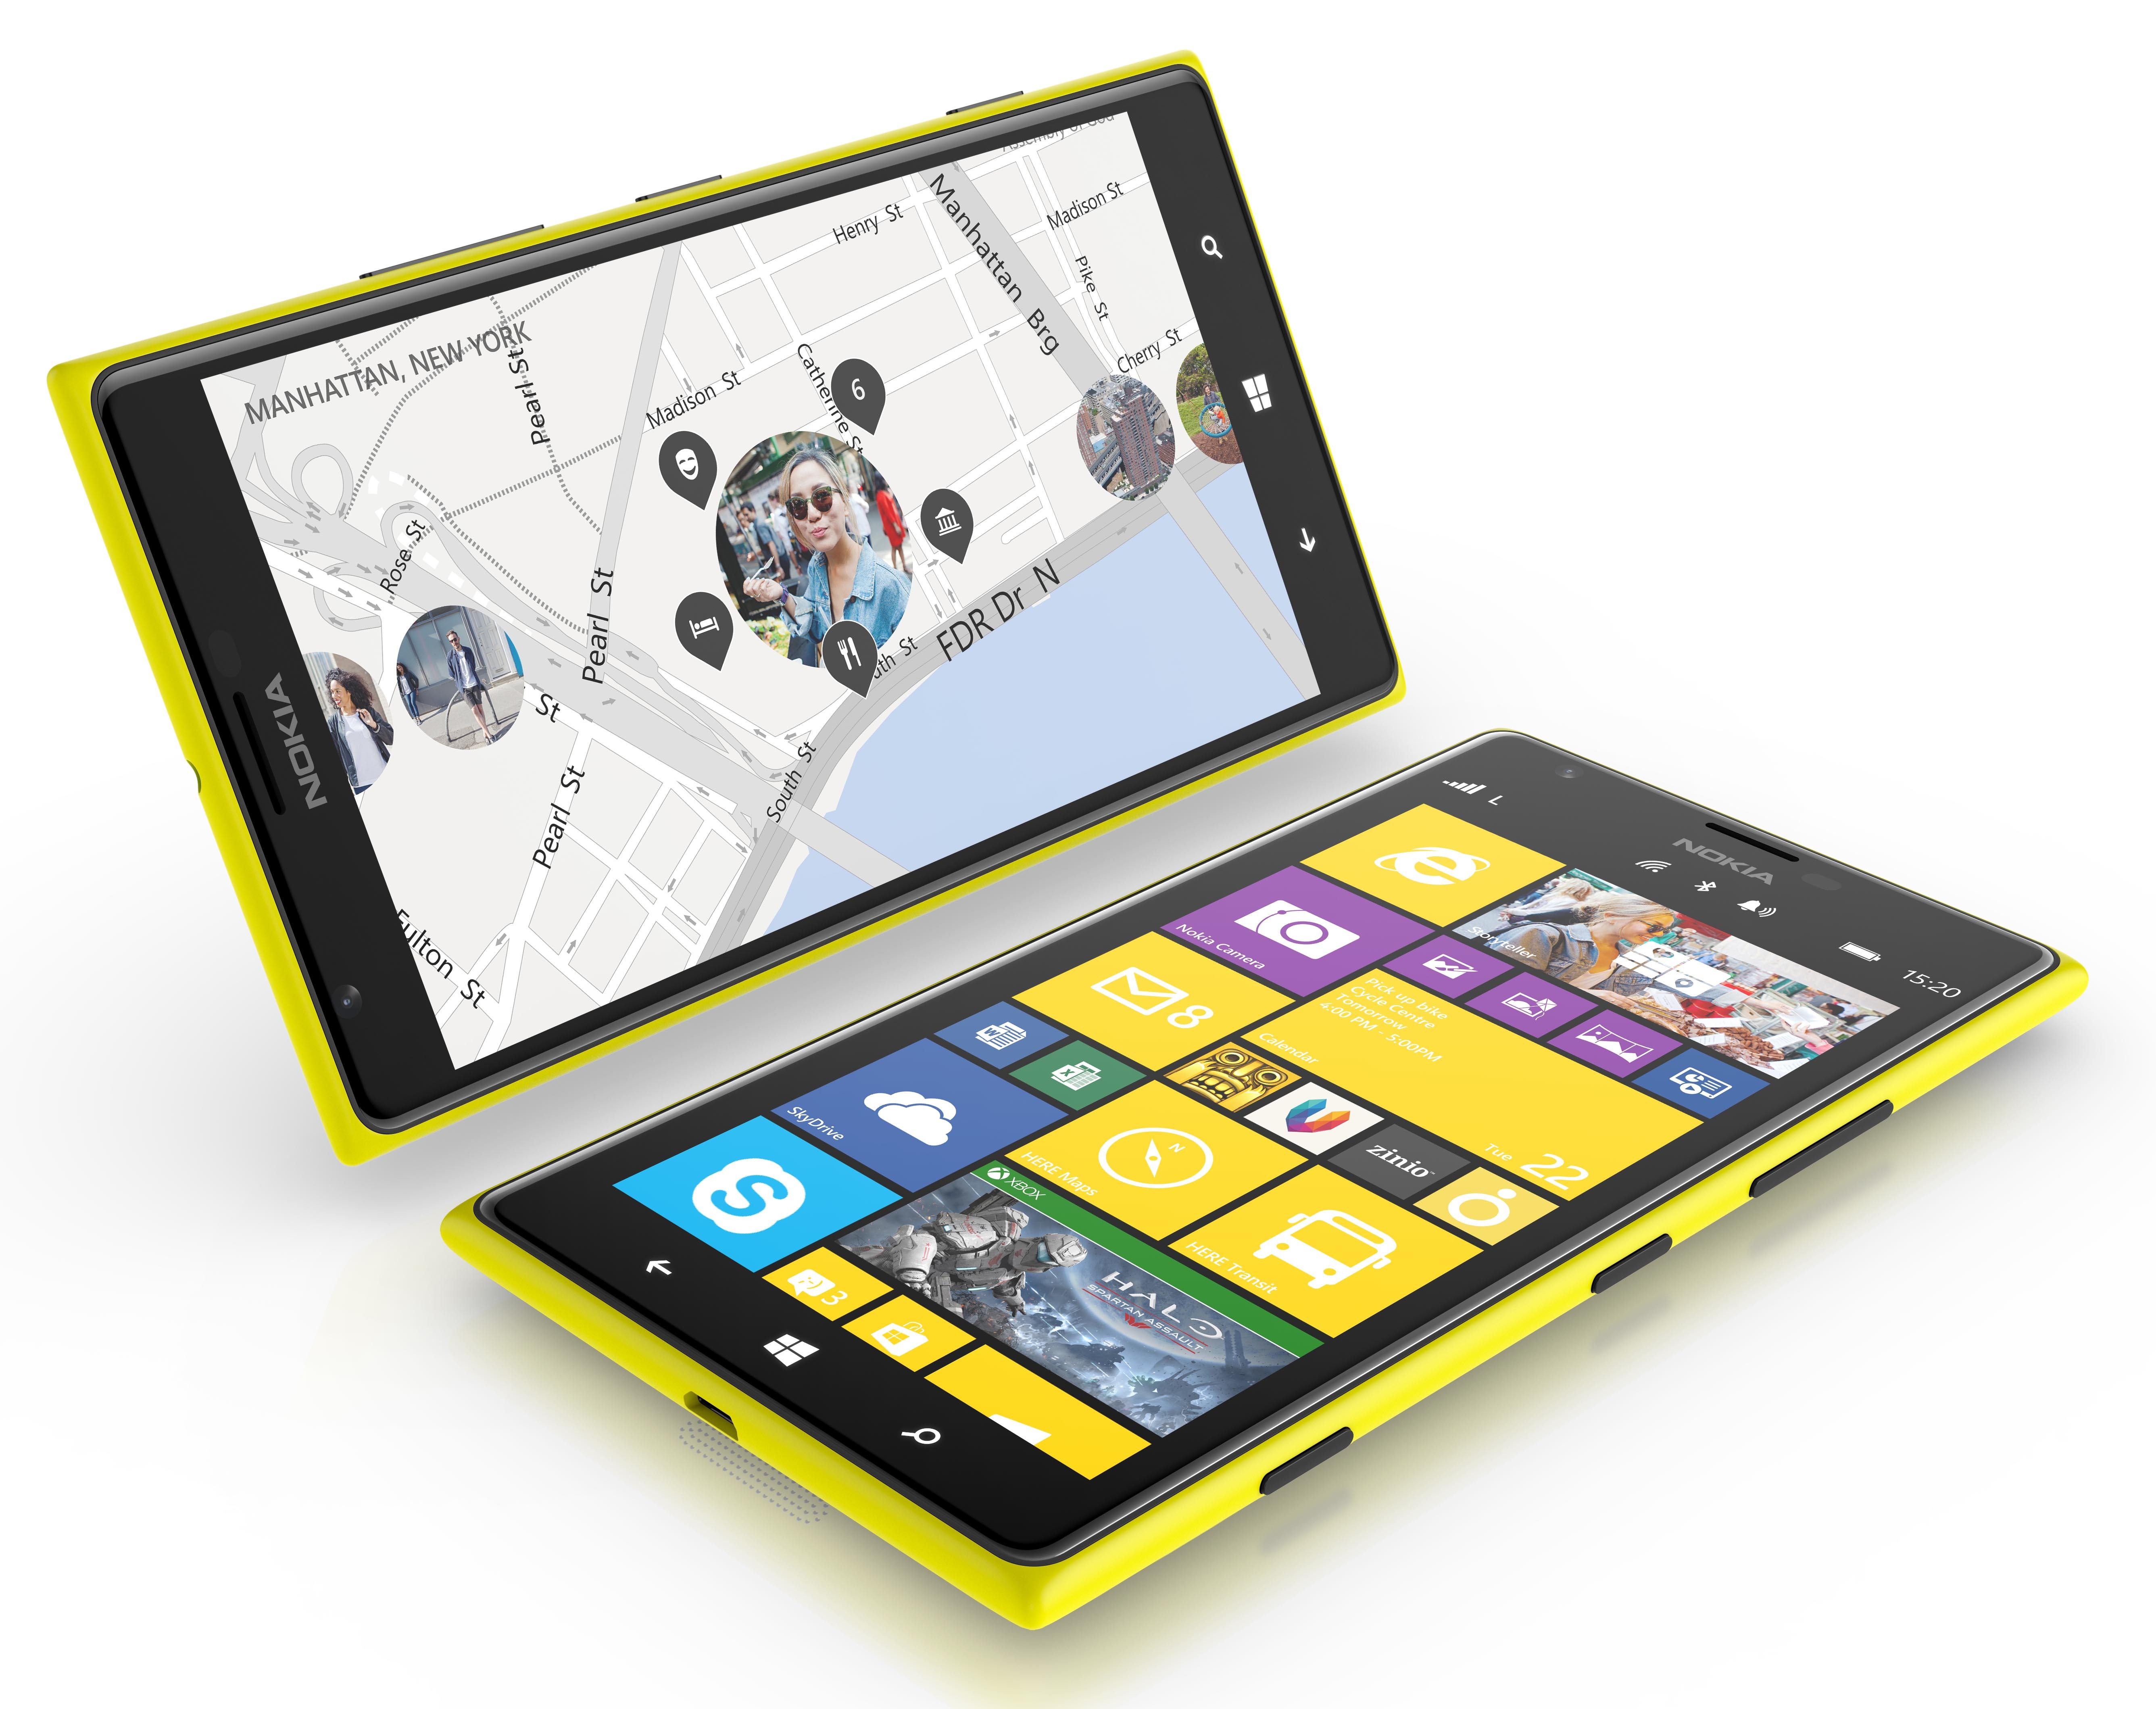 New Nokia Lumia First Phablet Wallpaper And Image